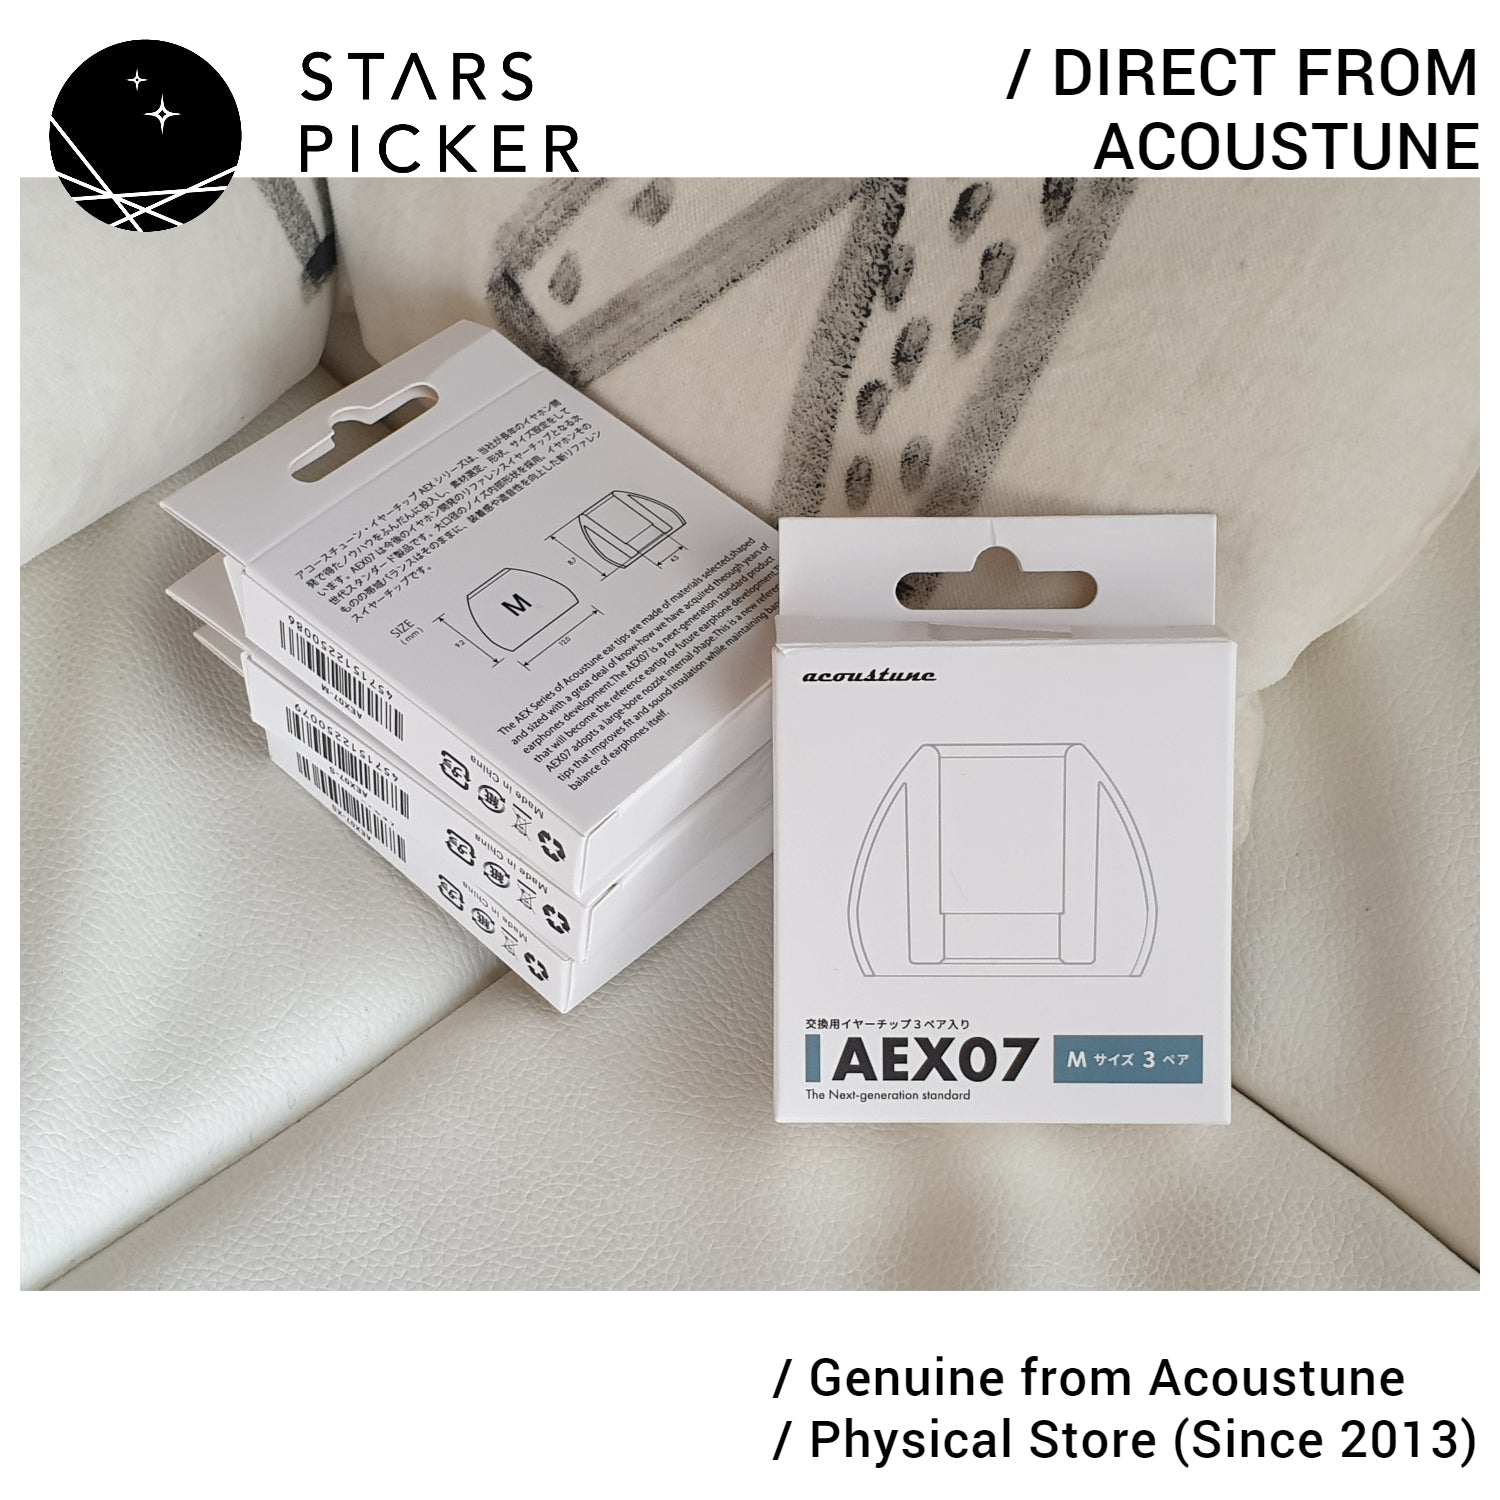 Acoustune AEX07 Eartips (4.5mm Nozzle Diameter) Next-Generation Silicone ear tips